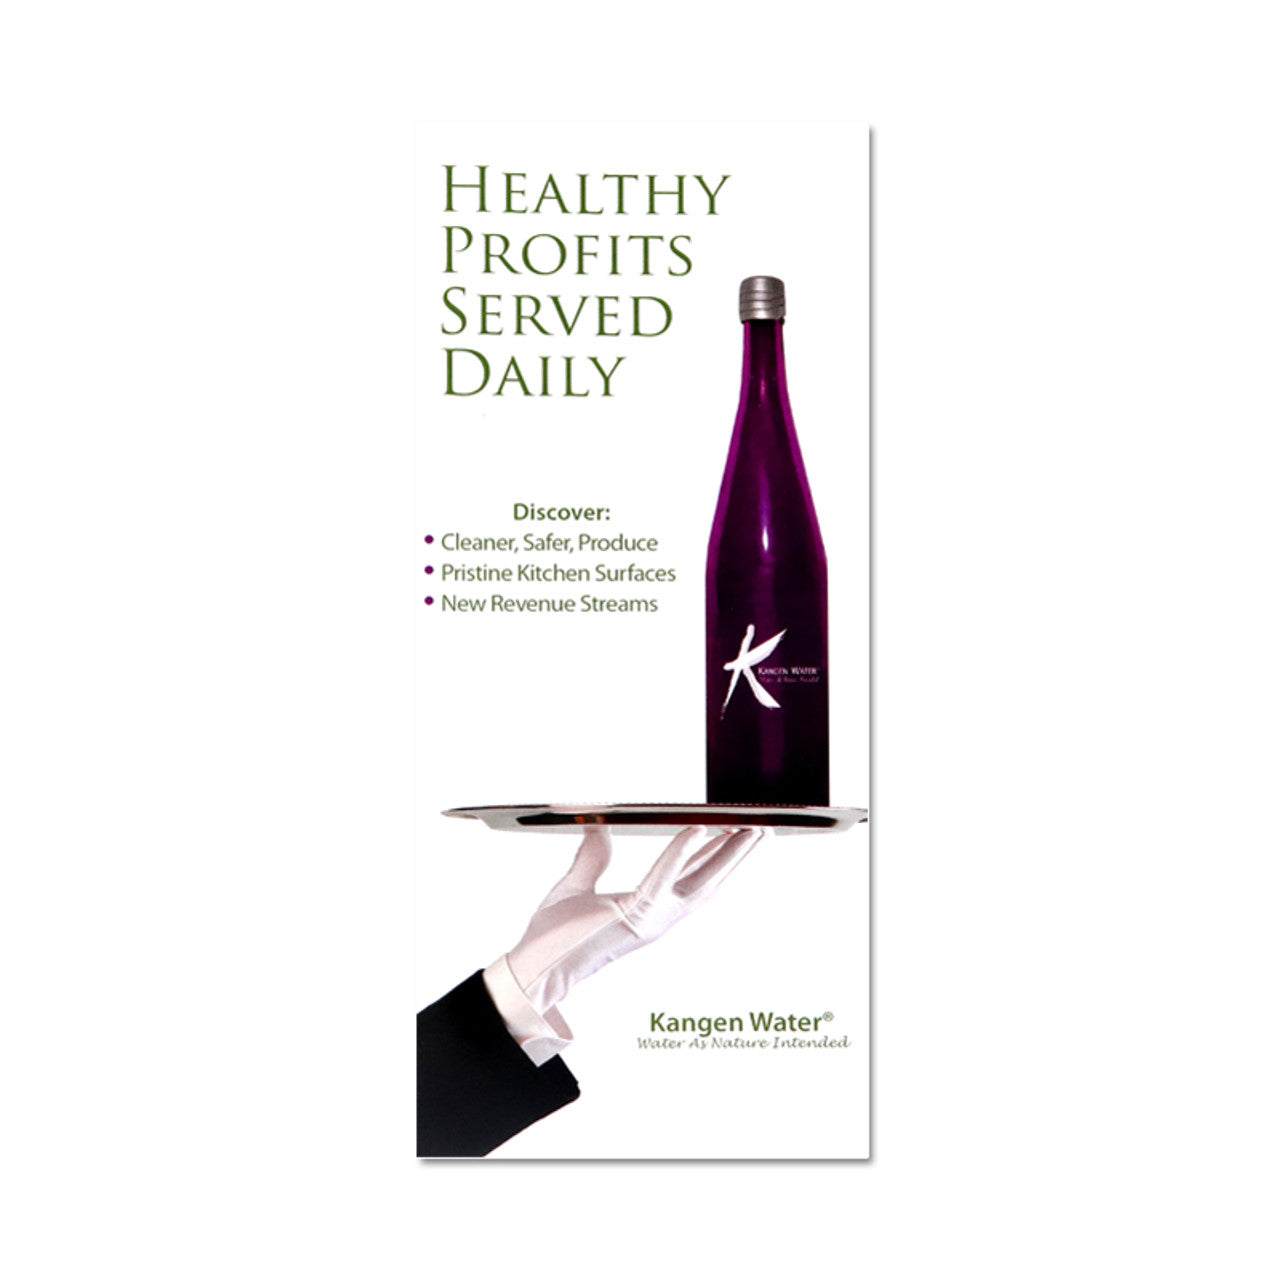 HEALTHY PROFITS SERVED DAILY